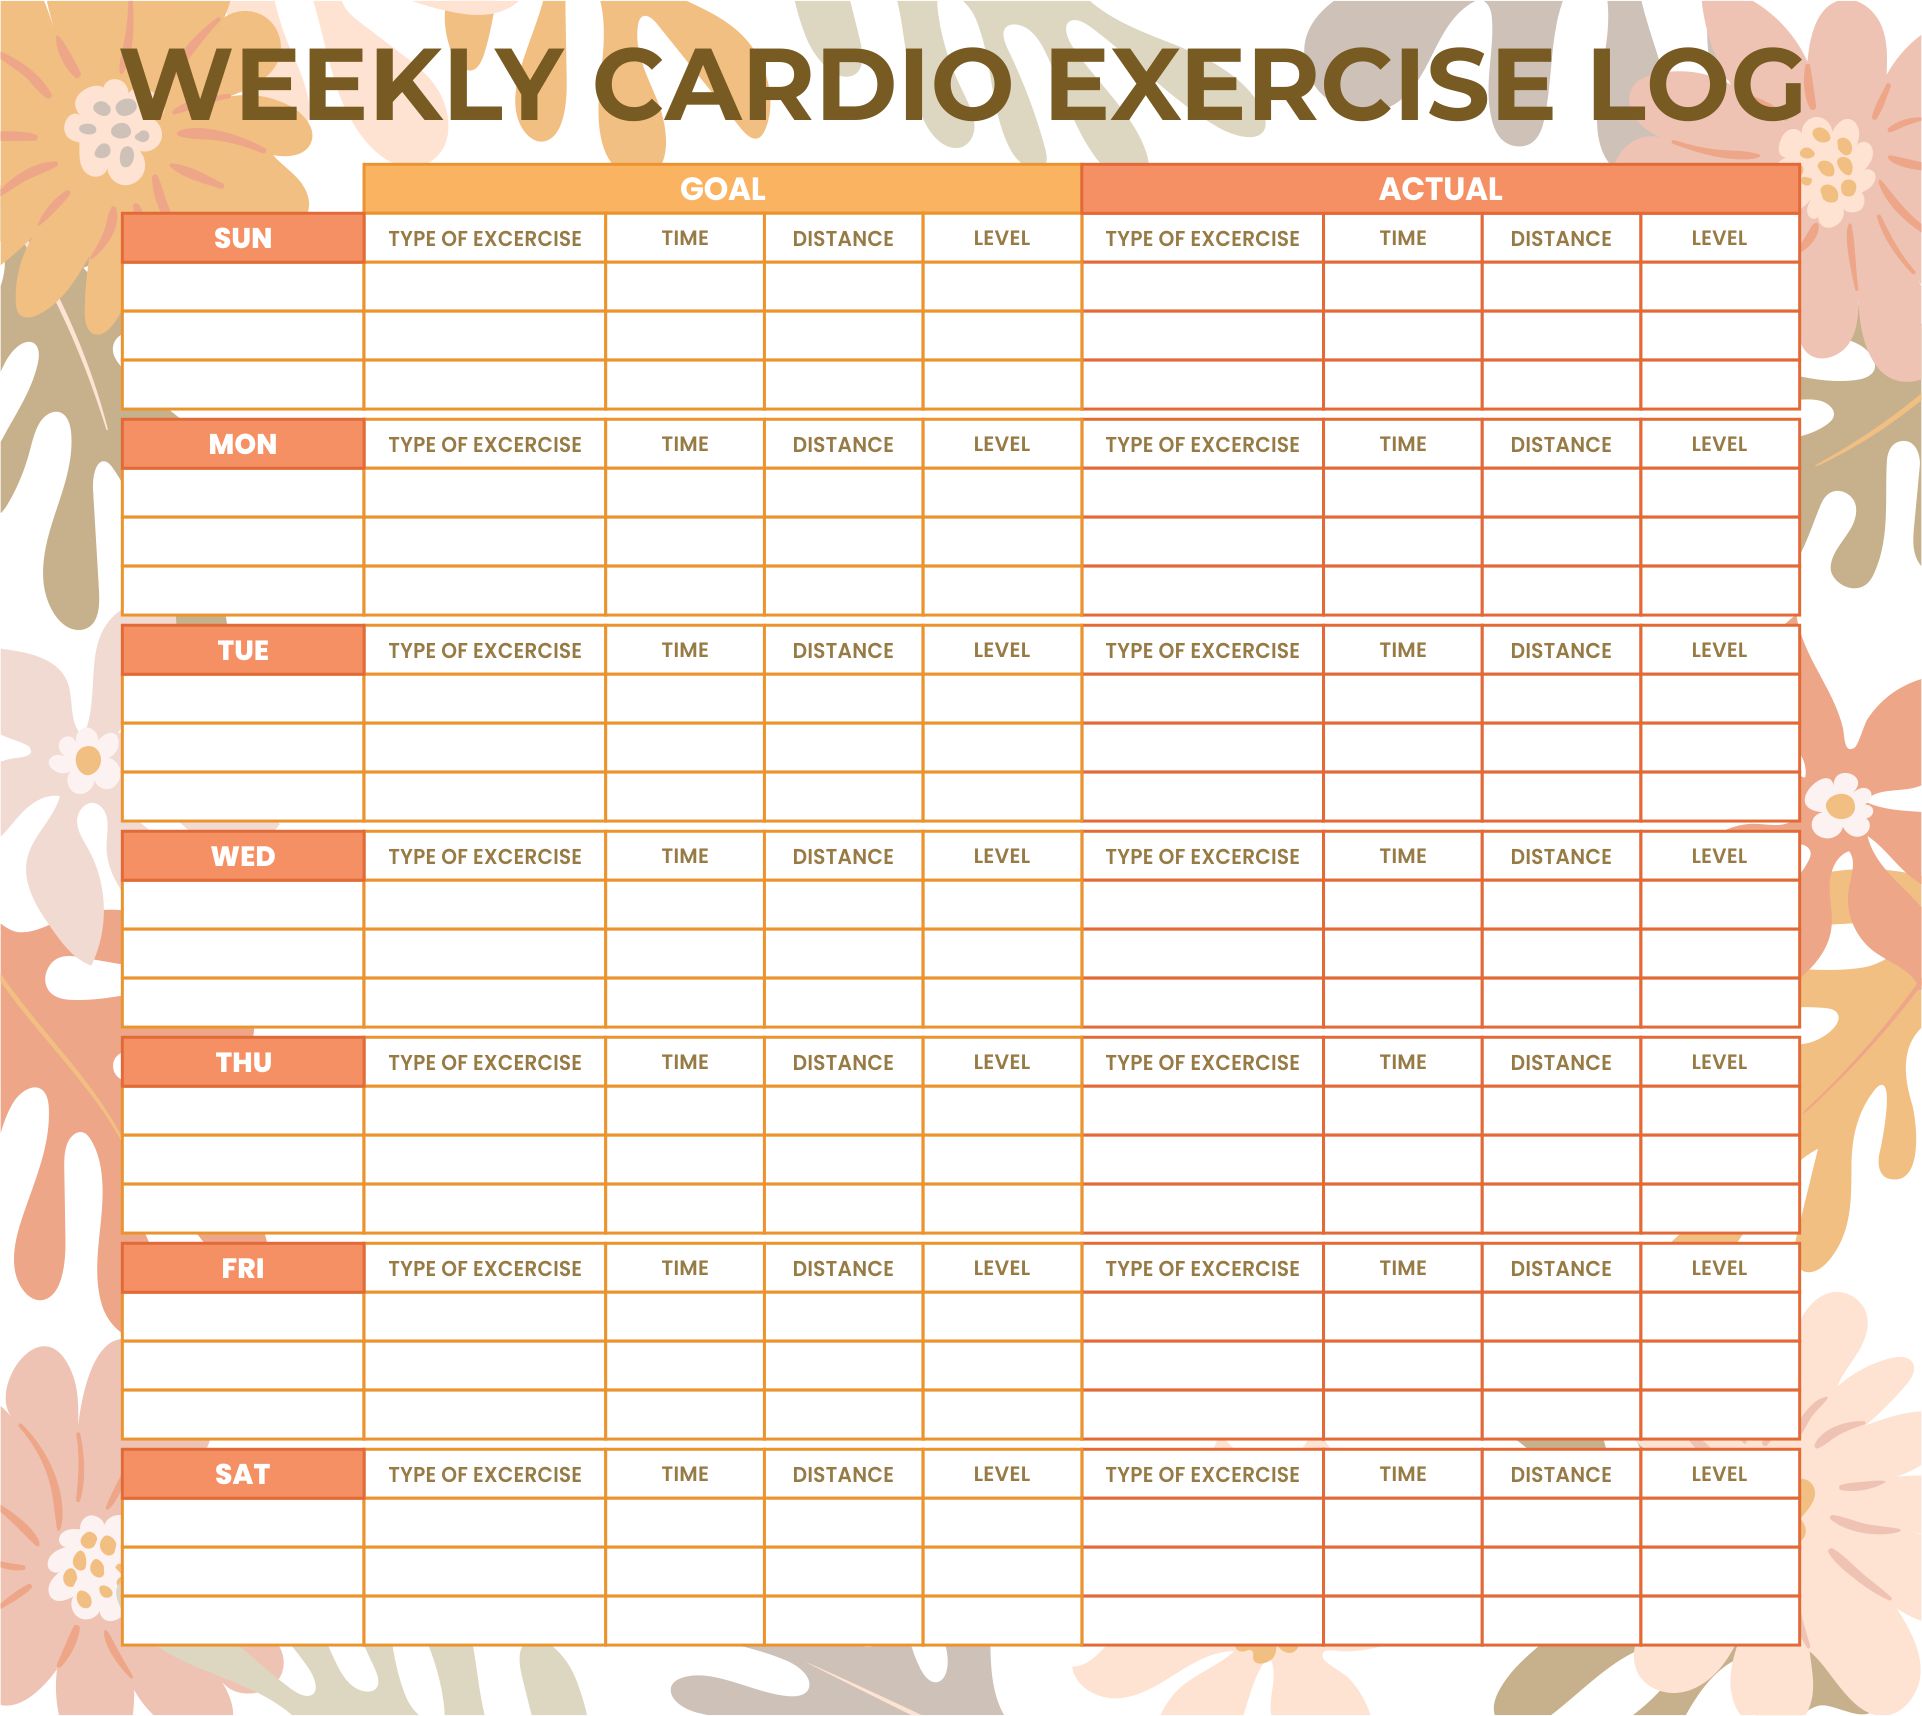 free-printable-exercise-cards